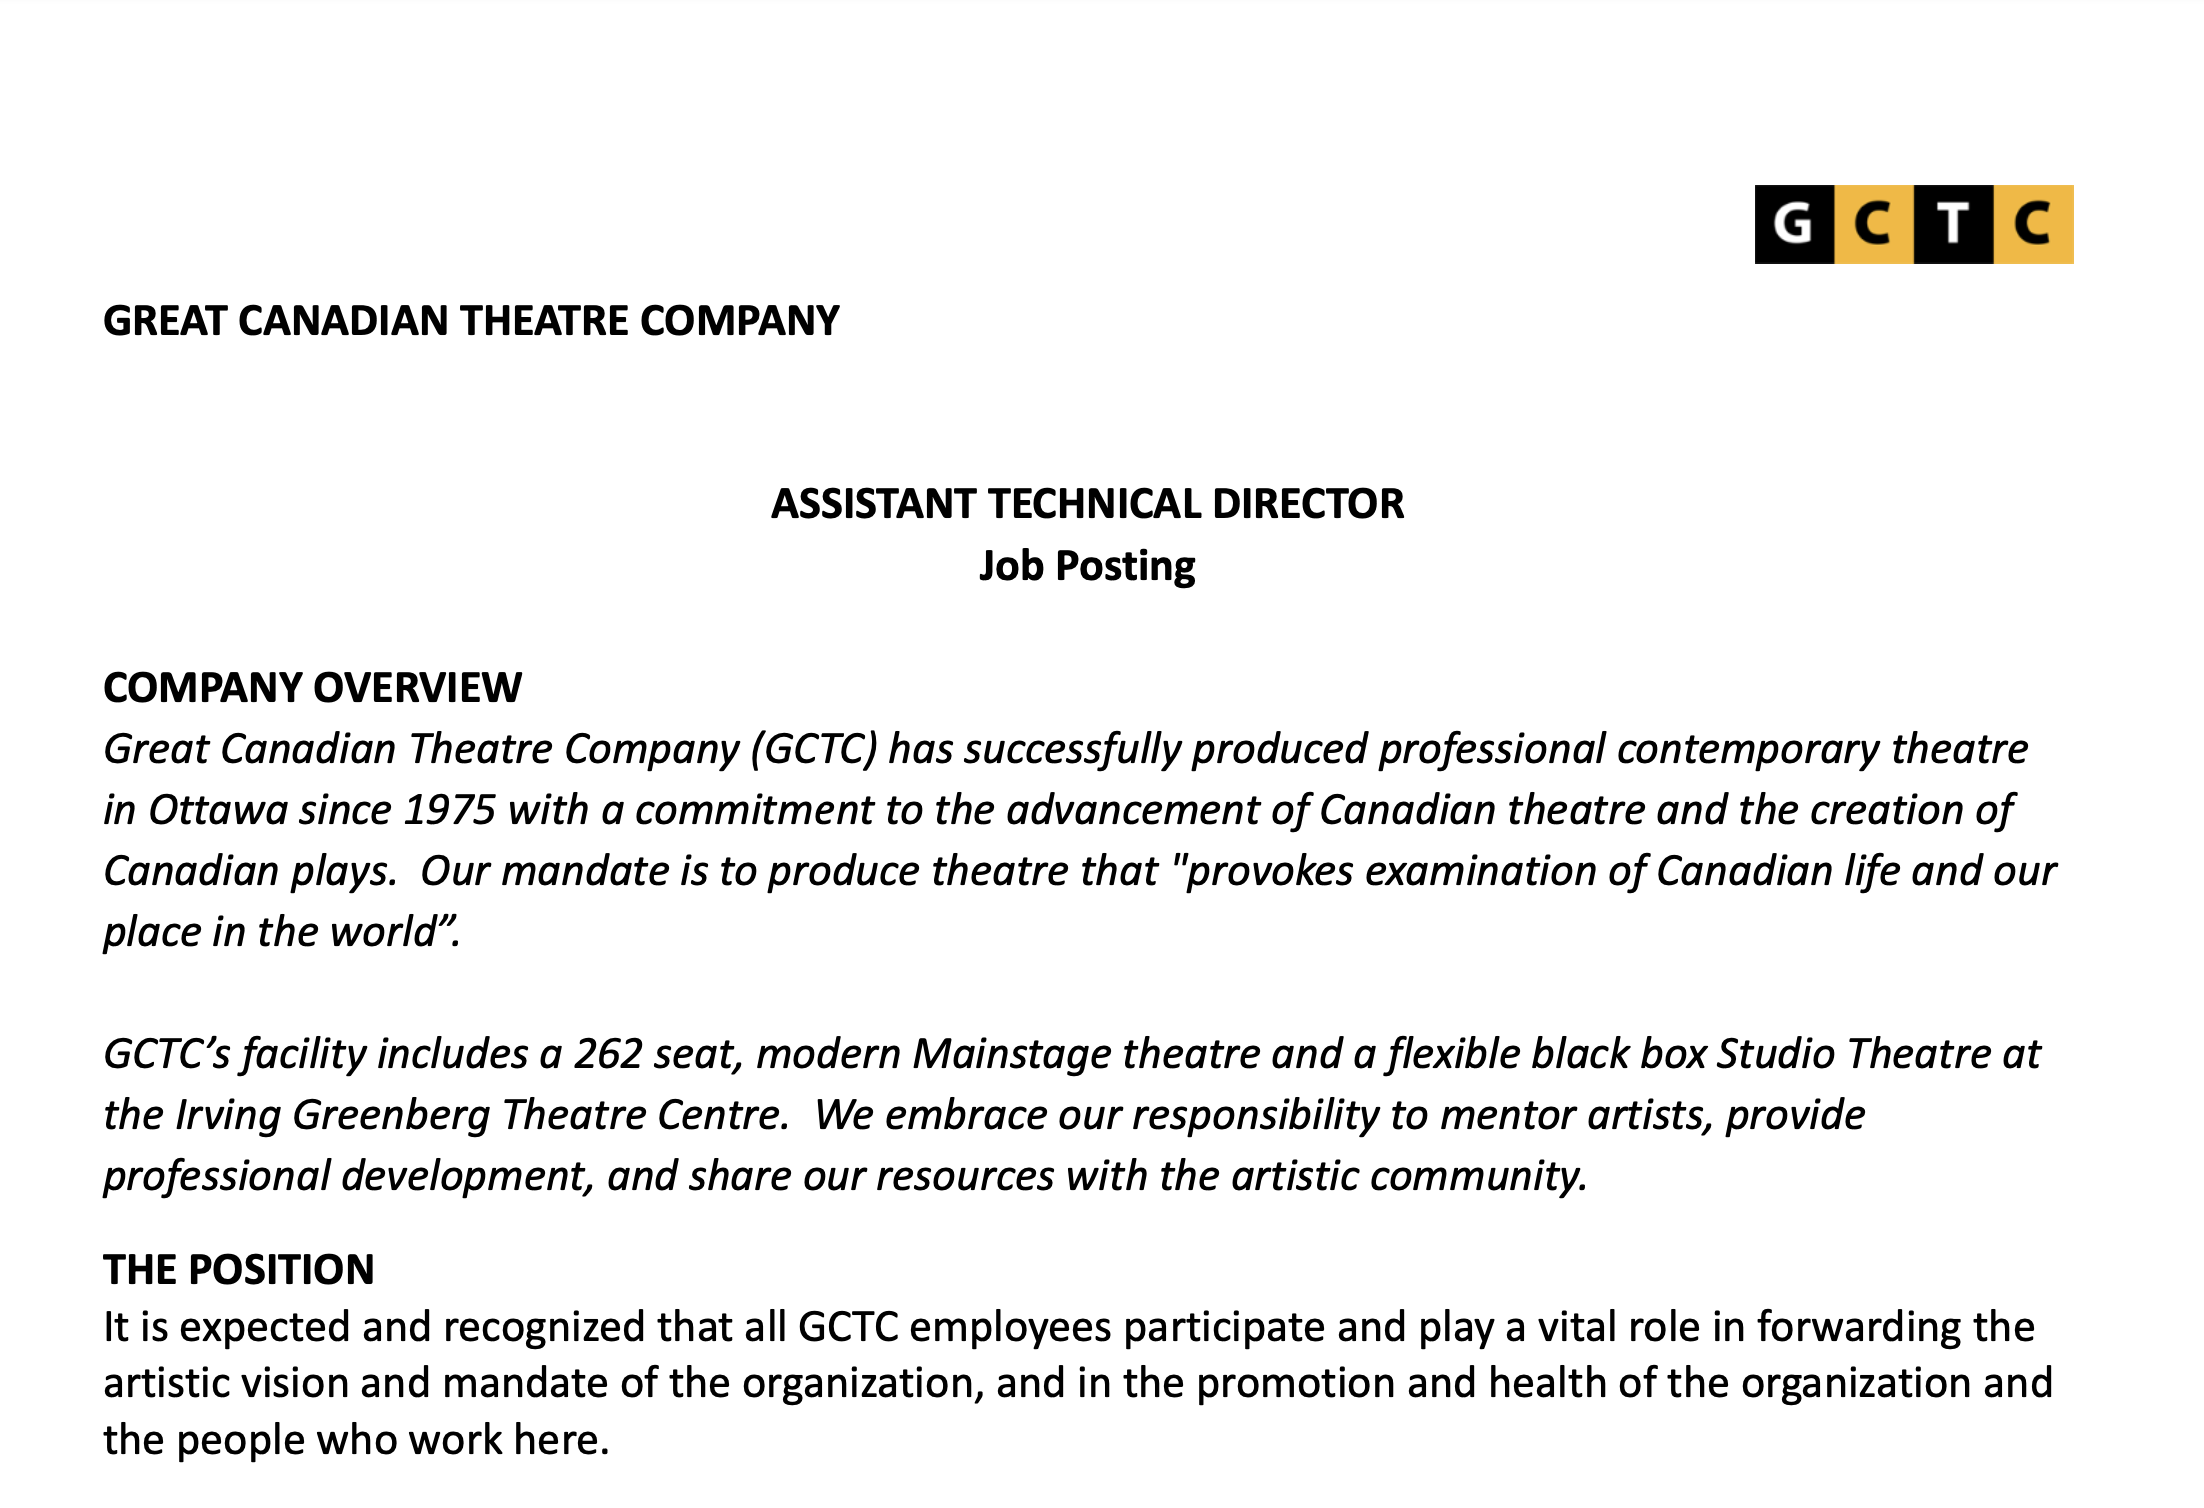 GCTC is seeking a ASSISTANT TECHNICAL DIRECTOR